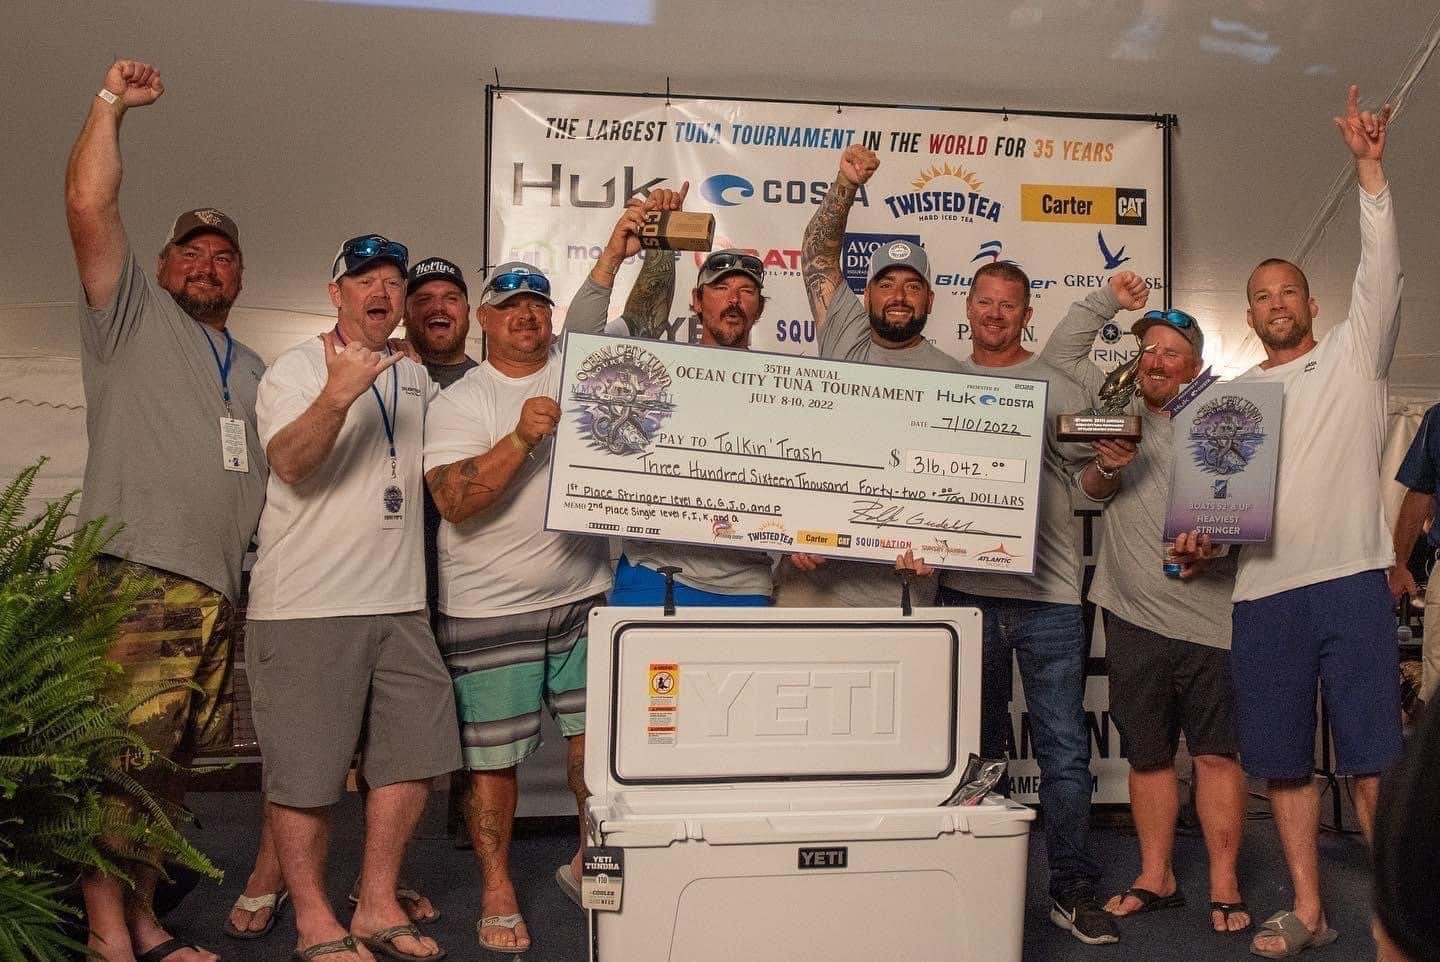 Chris Little (third from right) captained the Talkin’ Trash crew that placed first in the Heaviest Stringer category and second place in the Single Largest category.